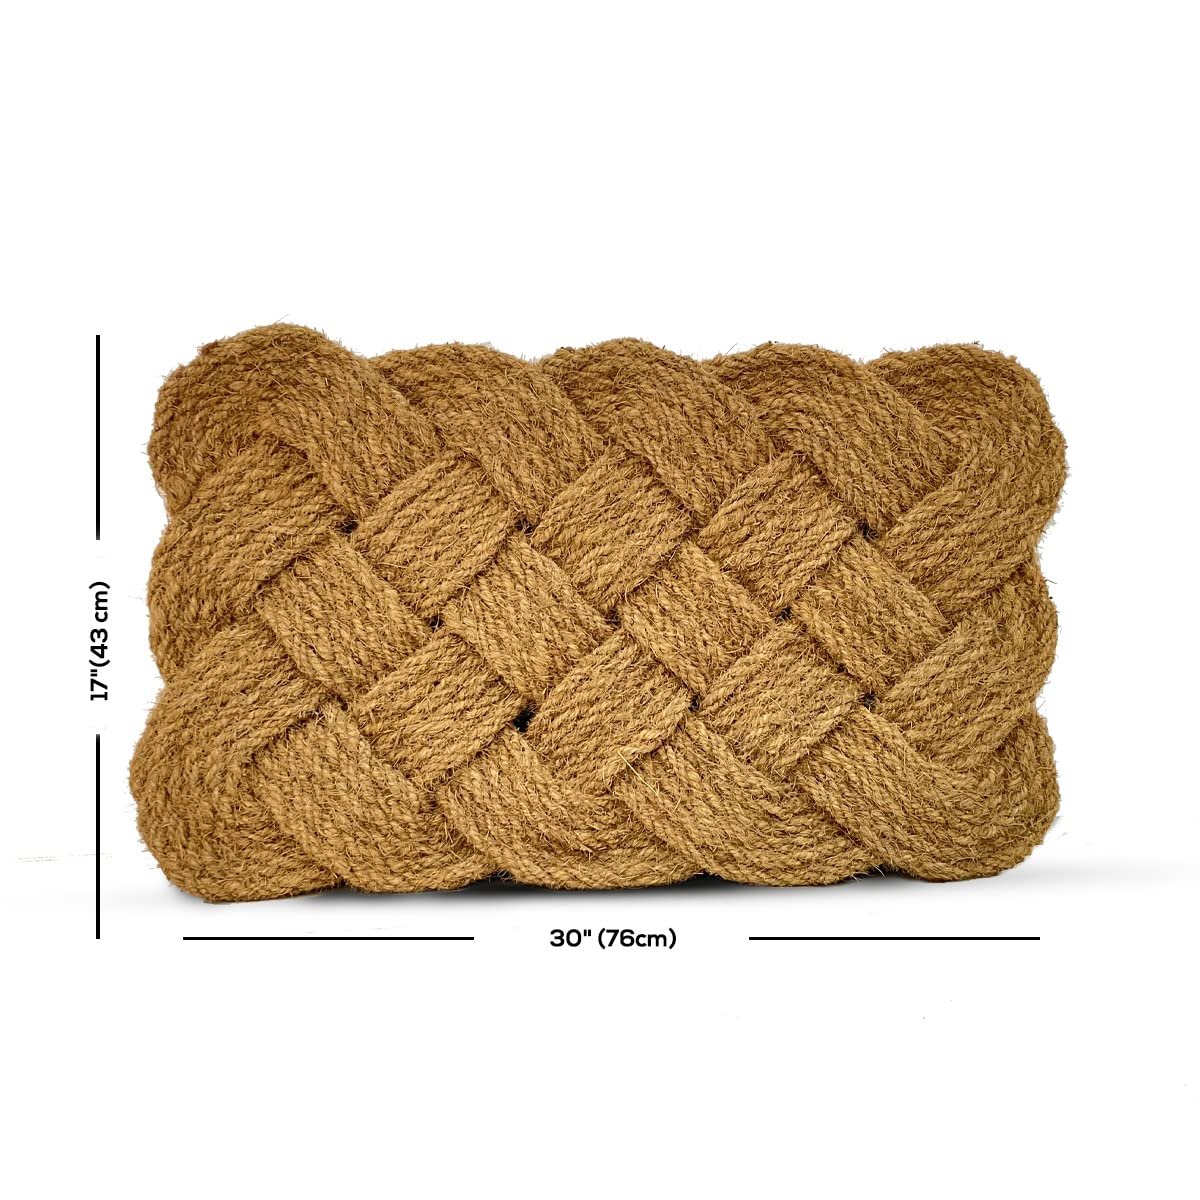 Buy Natural Coir Rope For Crafts Online. COD Available. Low Prices. Fast  Shipping. Premium Quality.